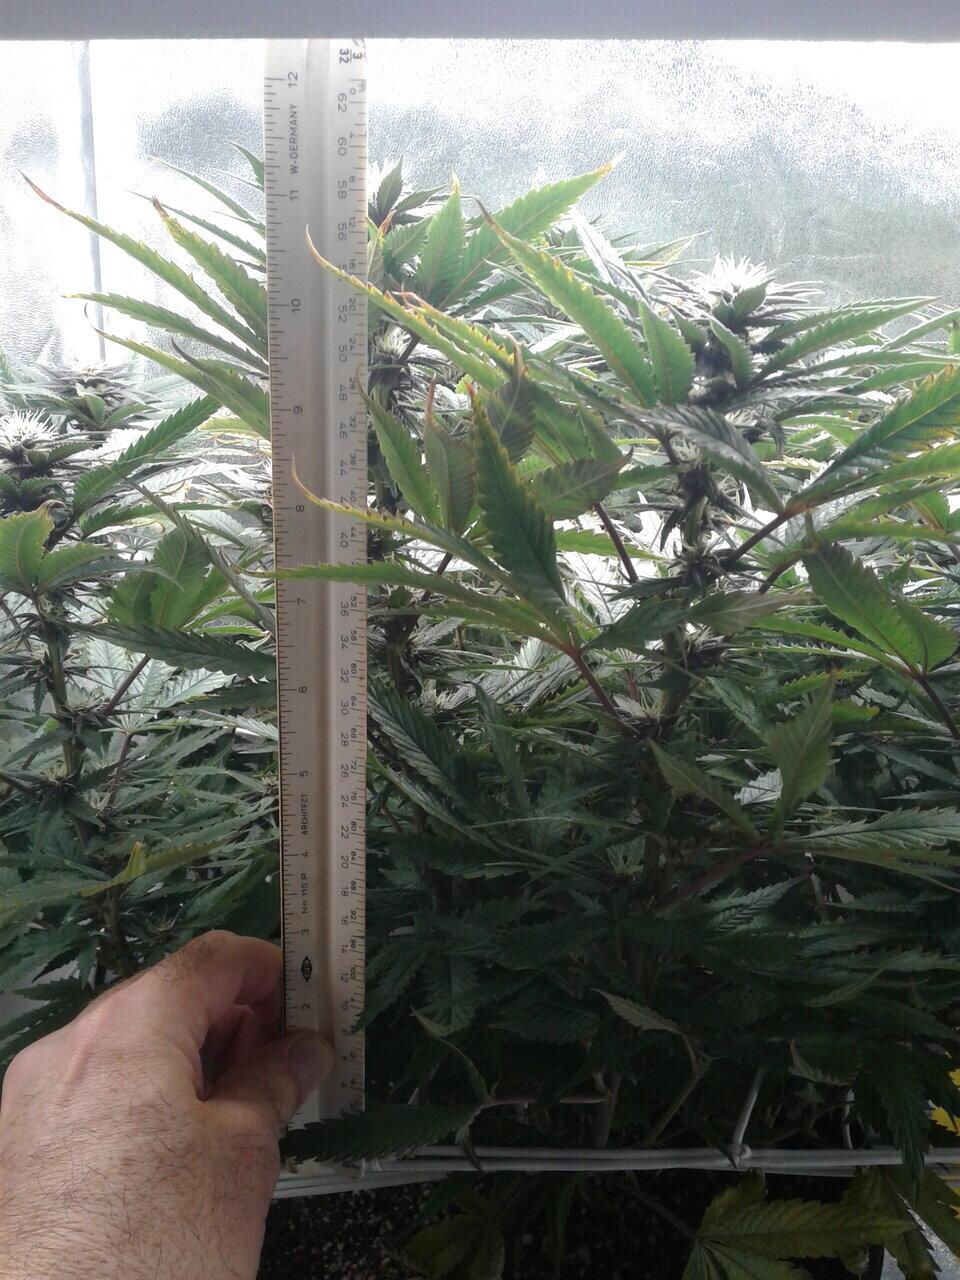 Black peruvian diesel bred and grown by me under ts 1000 10